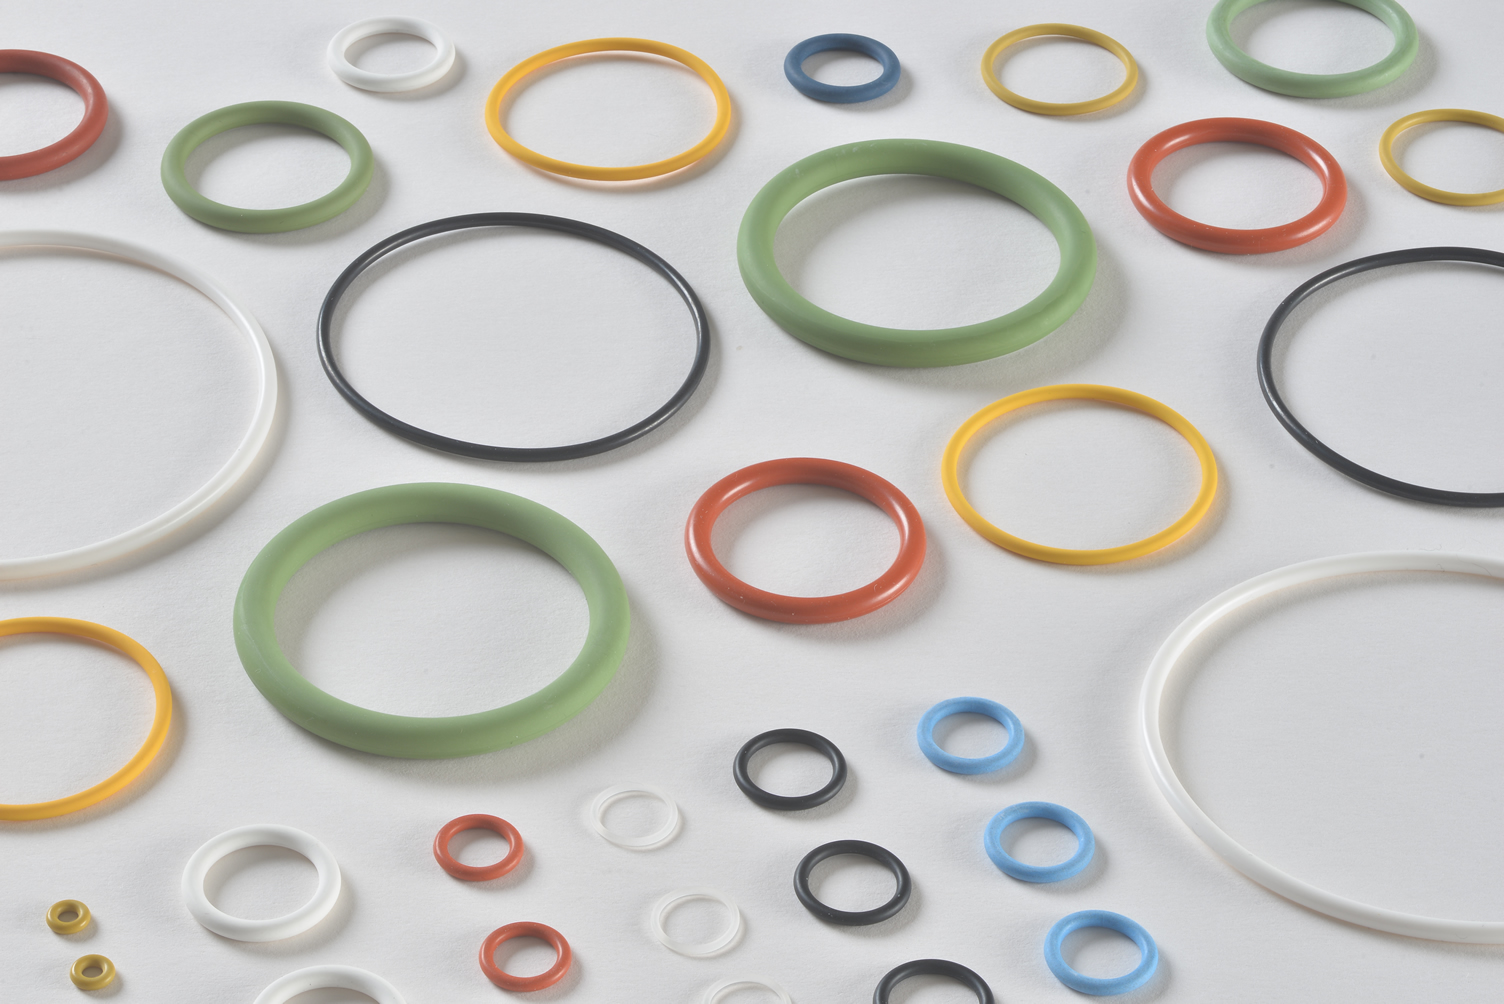 What makes O-rings Food Safe?